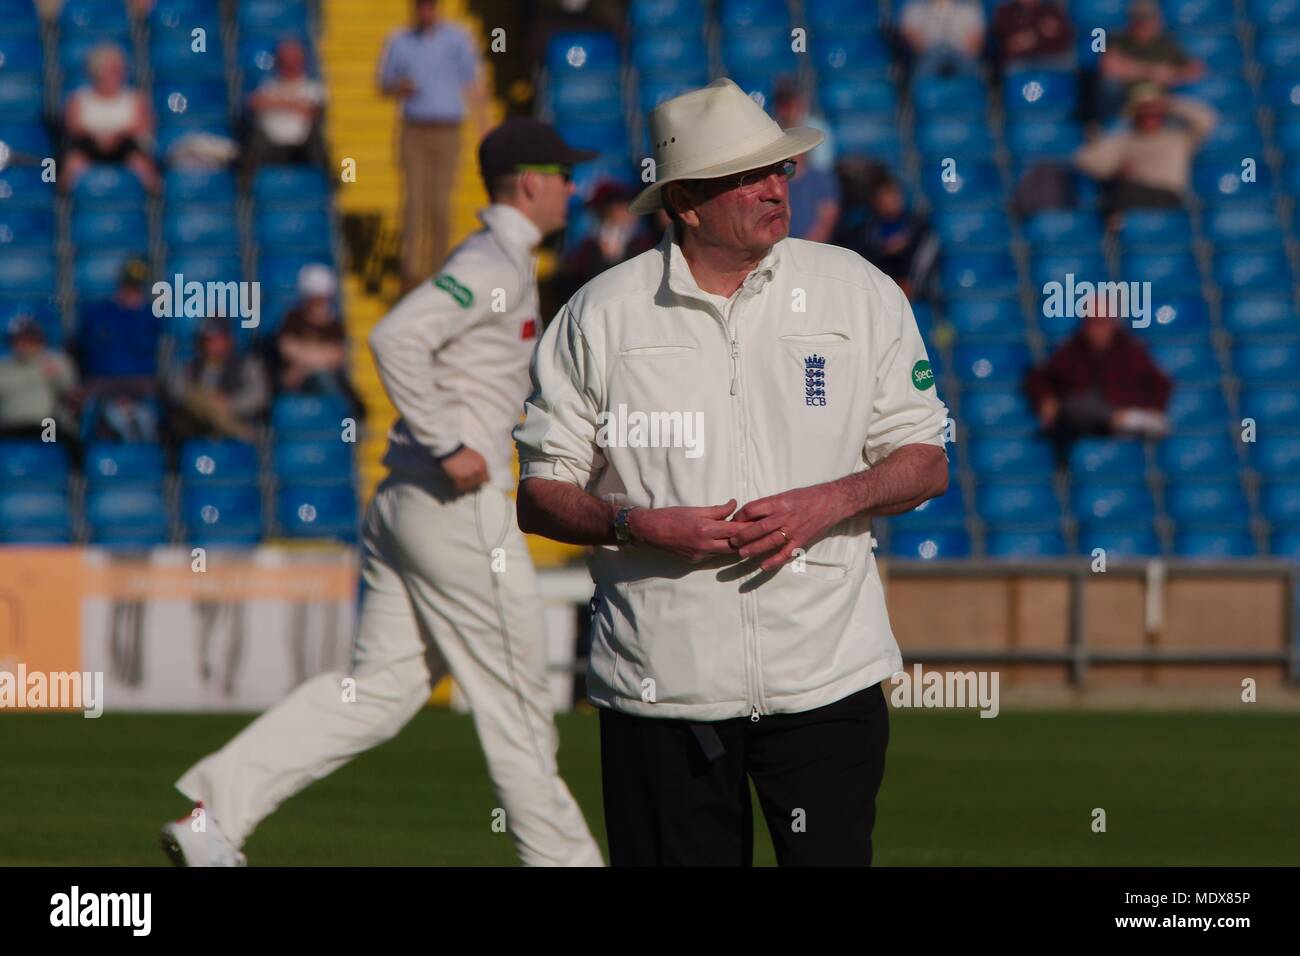 Leeds, England, 20 April 2018. Nick Cook umpiring in the Yorkshire against Nottinghamshire county championship match at Emerald Headingley, Leeds. Credit: Colin Edwards/Alamy Live News. Stock Photo